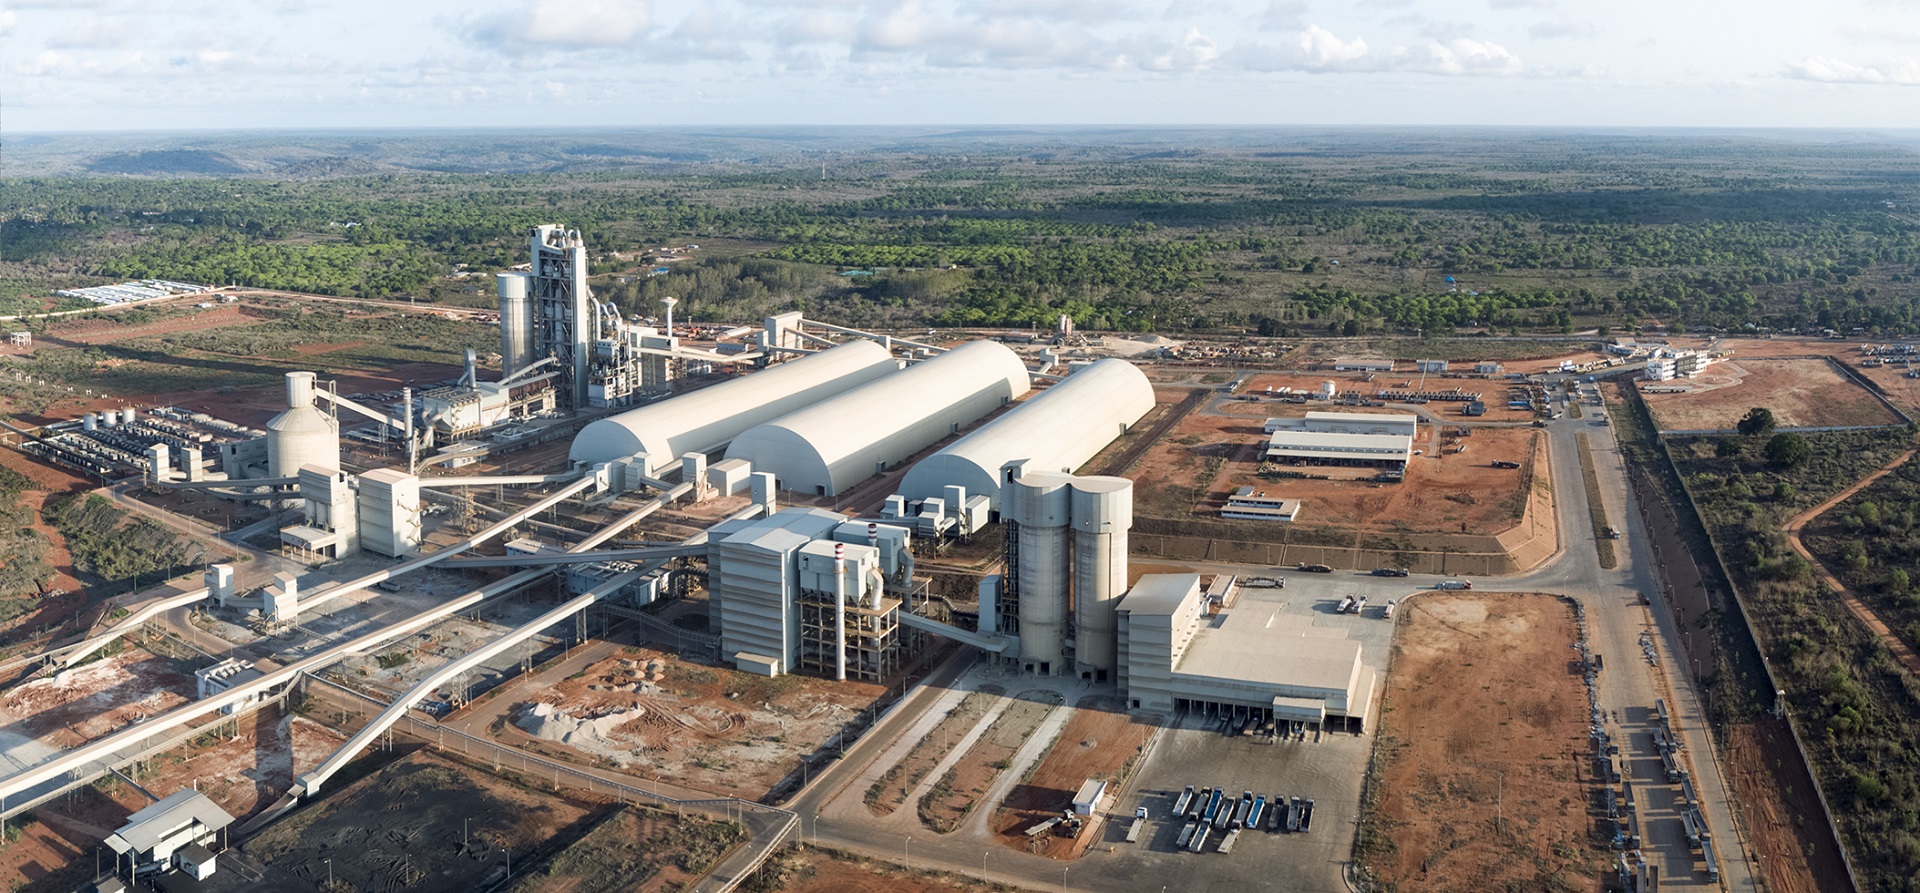 The African cement market offers some growth spots for investors despite excess capacity and competition